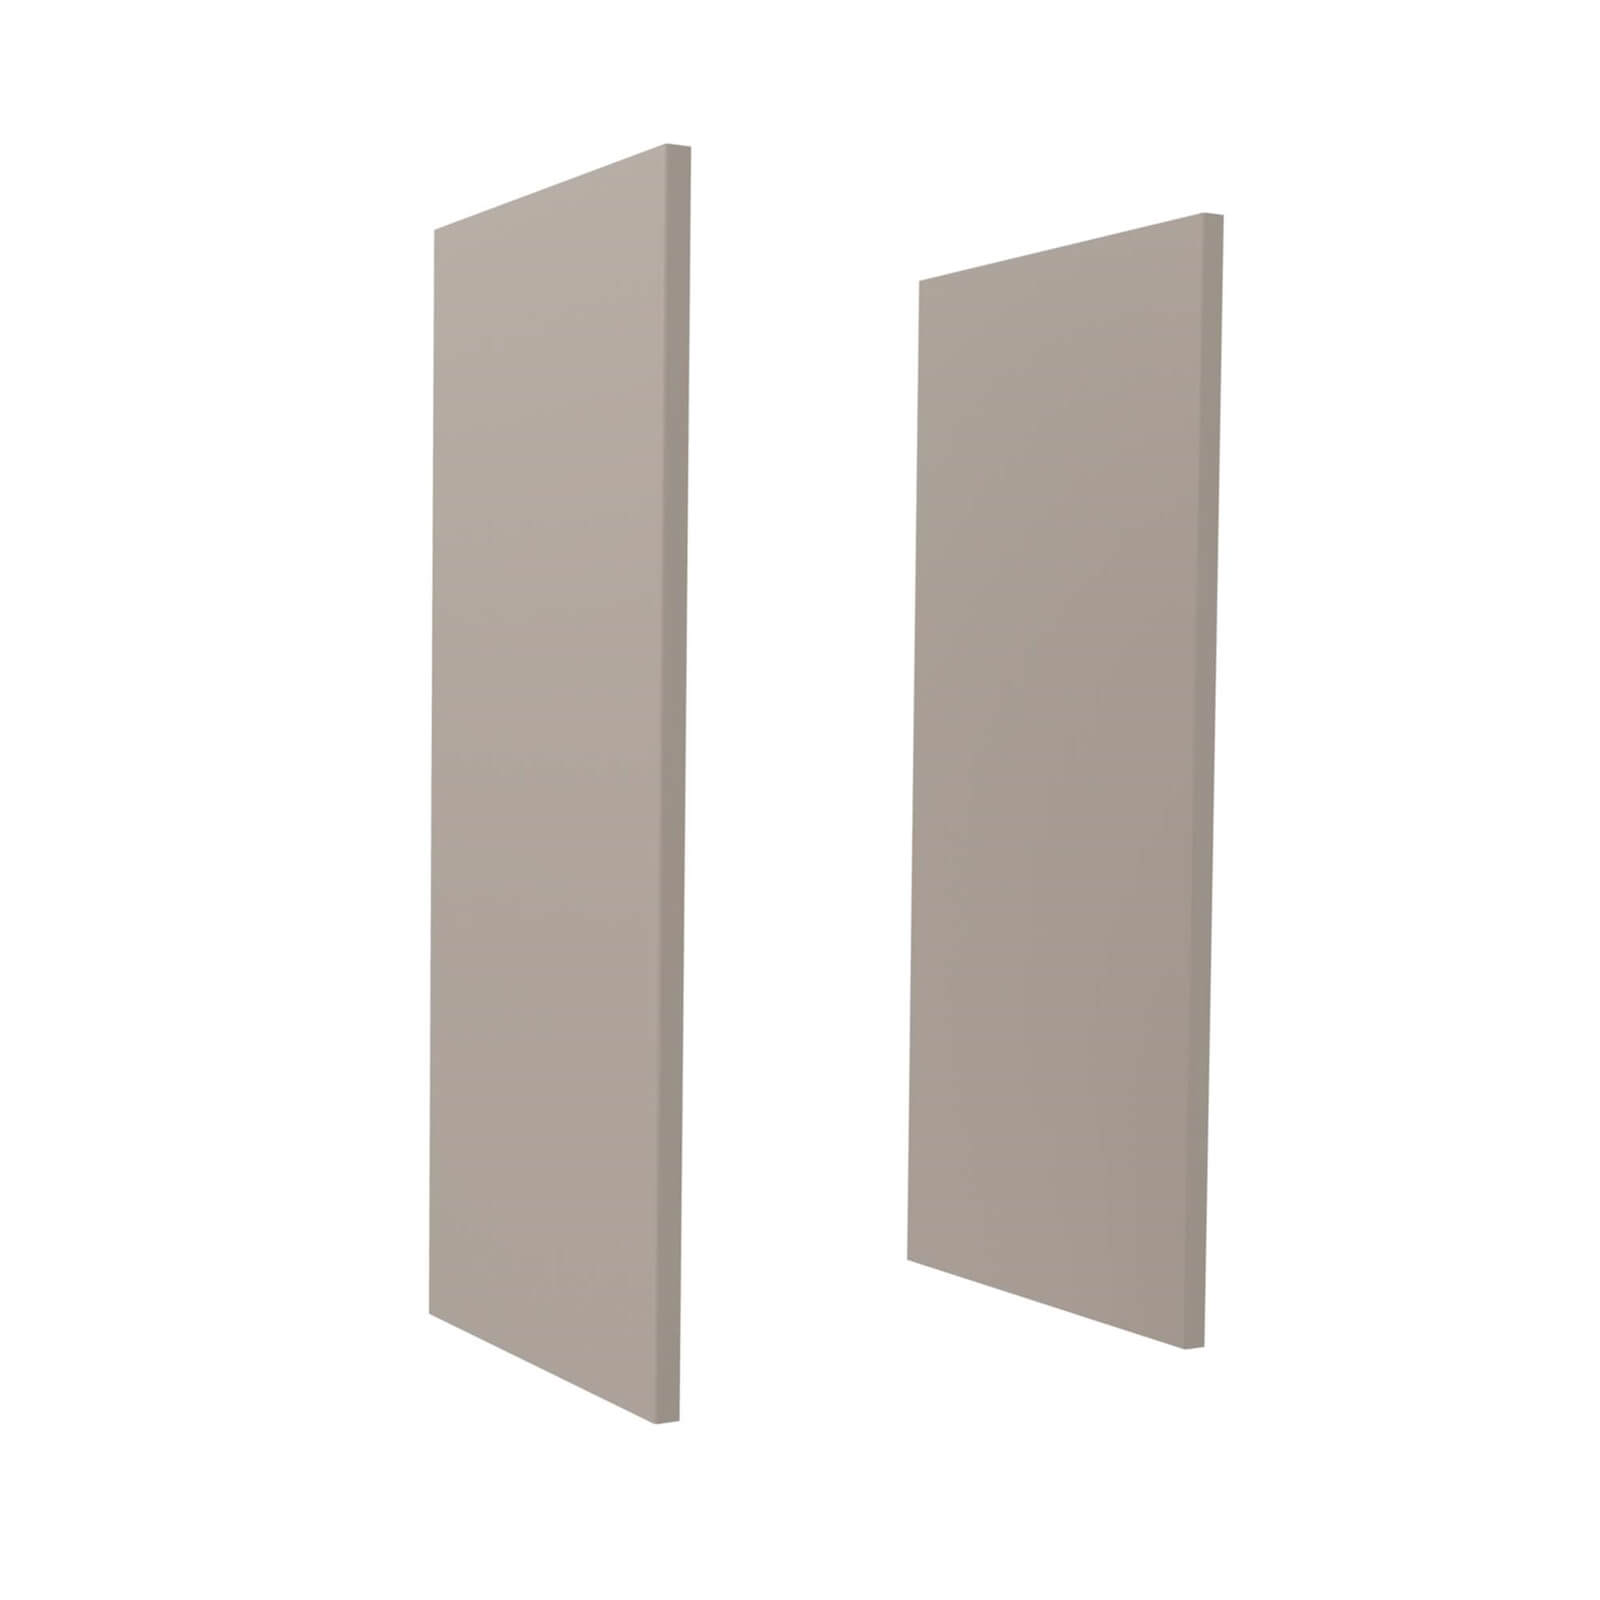 Handleless Cashmere Gloss Wall Replacement End Panels - Pair